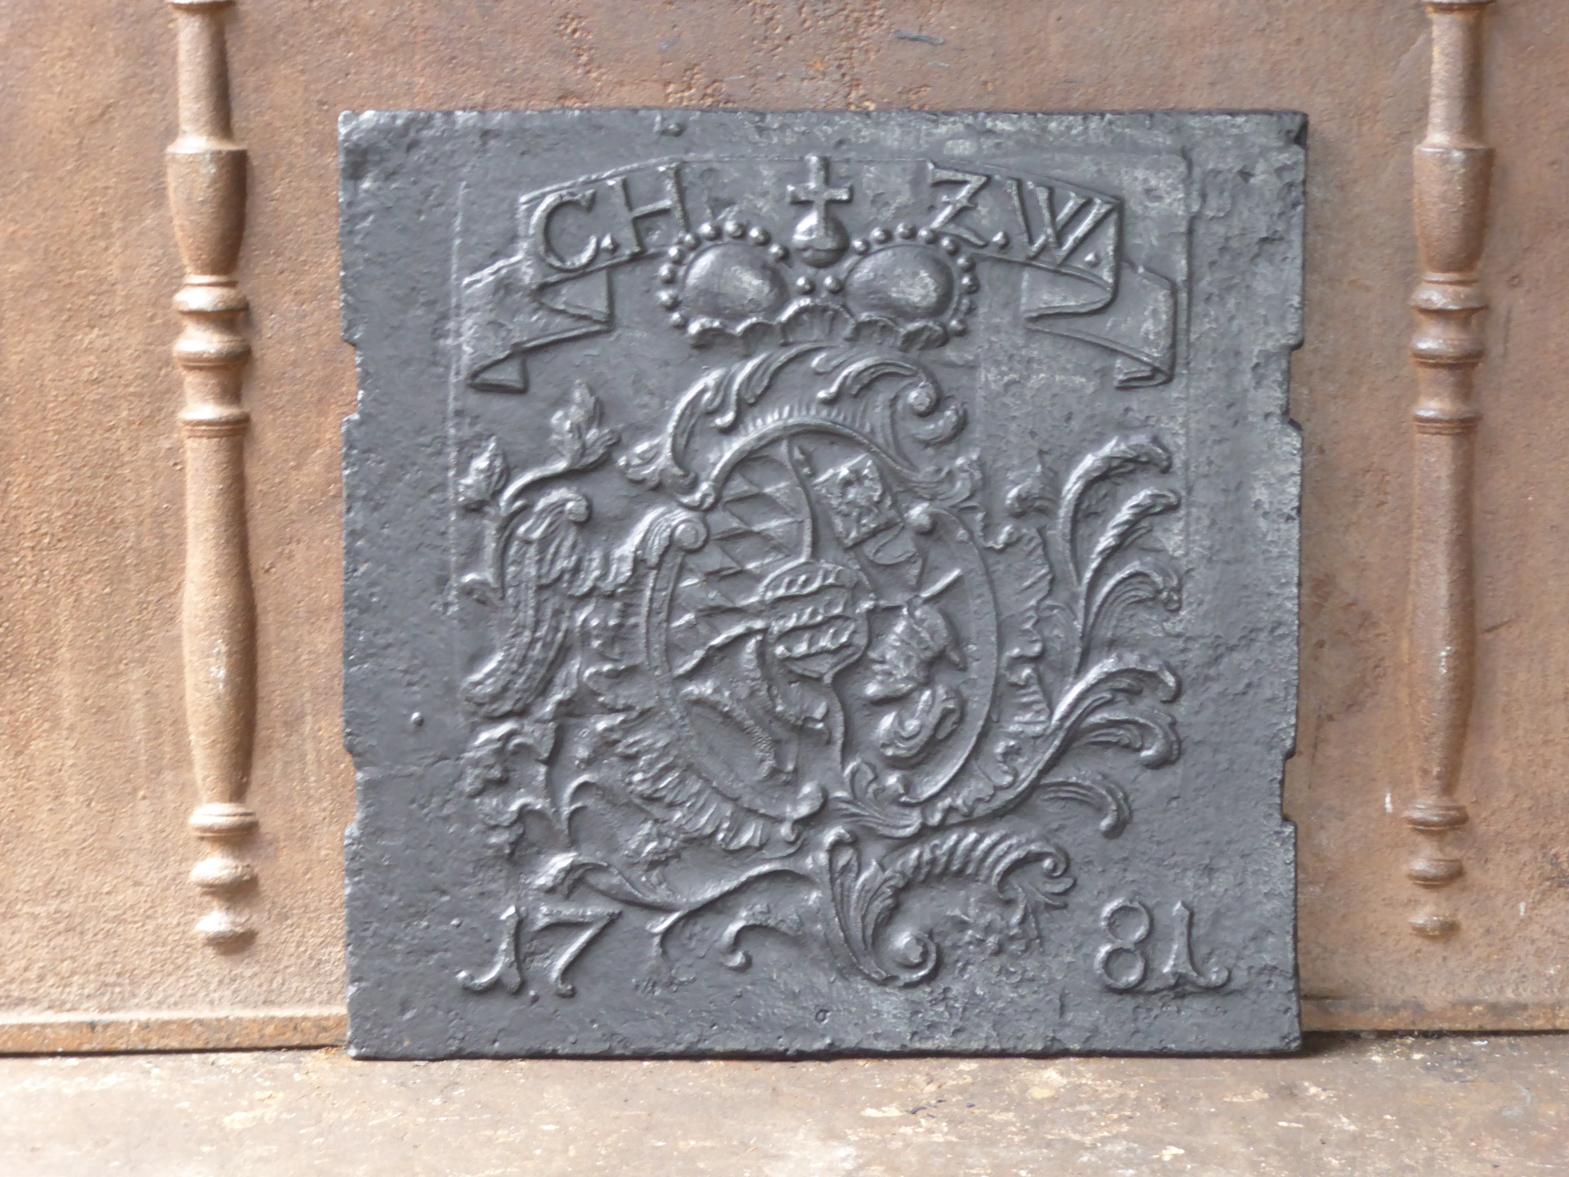 18th Century German Louis XV fireback with an unknown coat of arms. The fireback is made of cast iron and has a black / pewter patina. The condition is good, no cracks.







